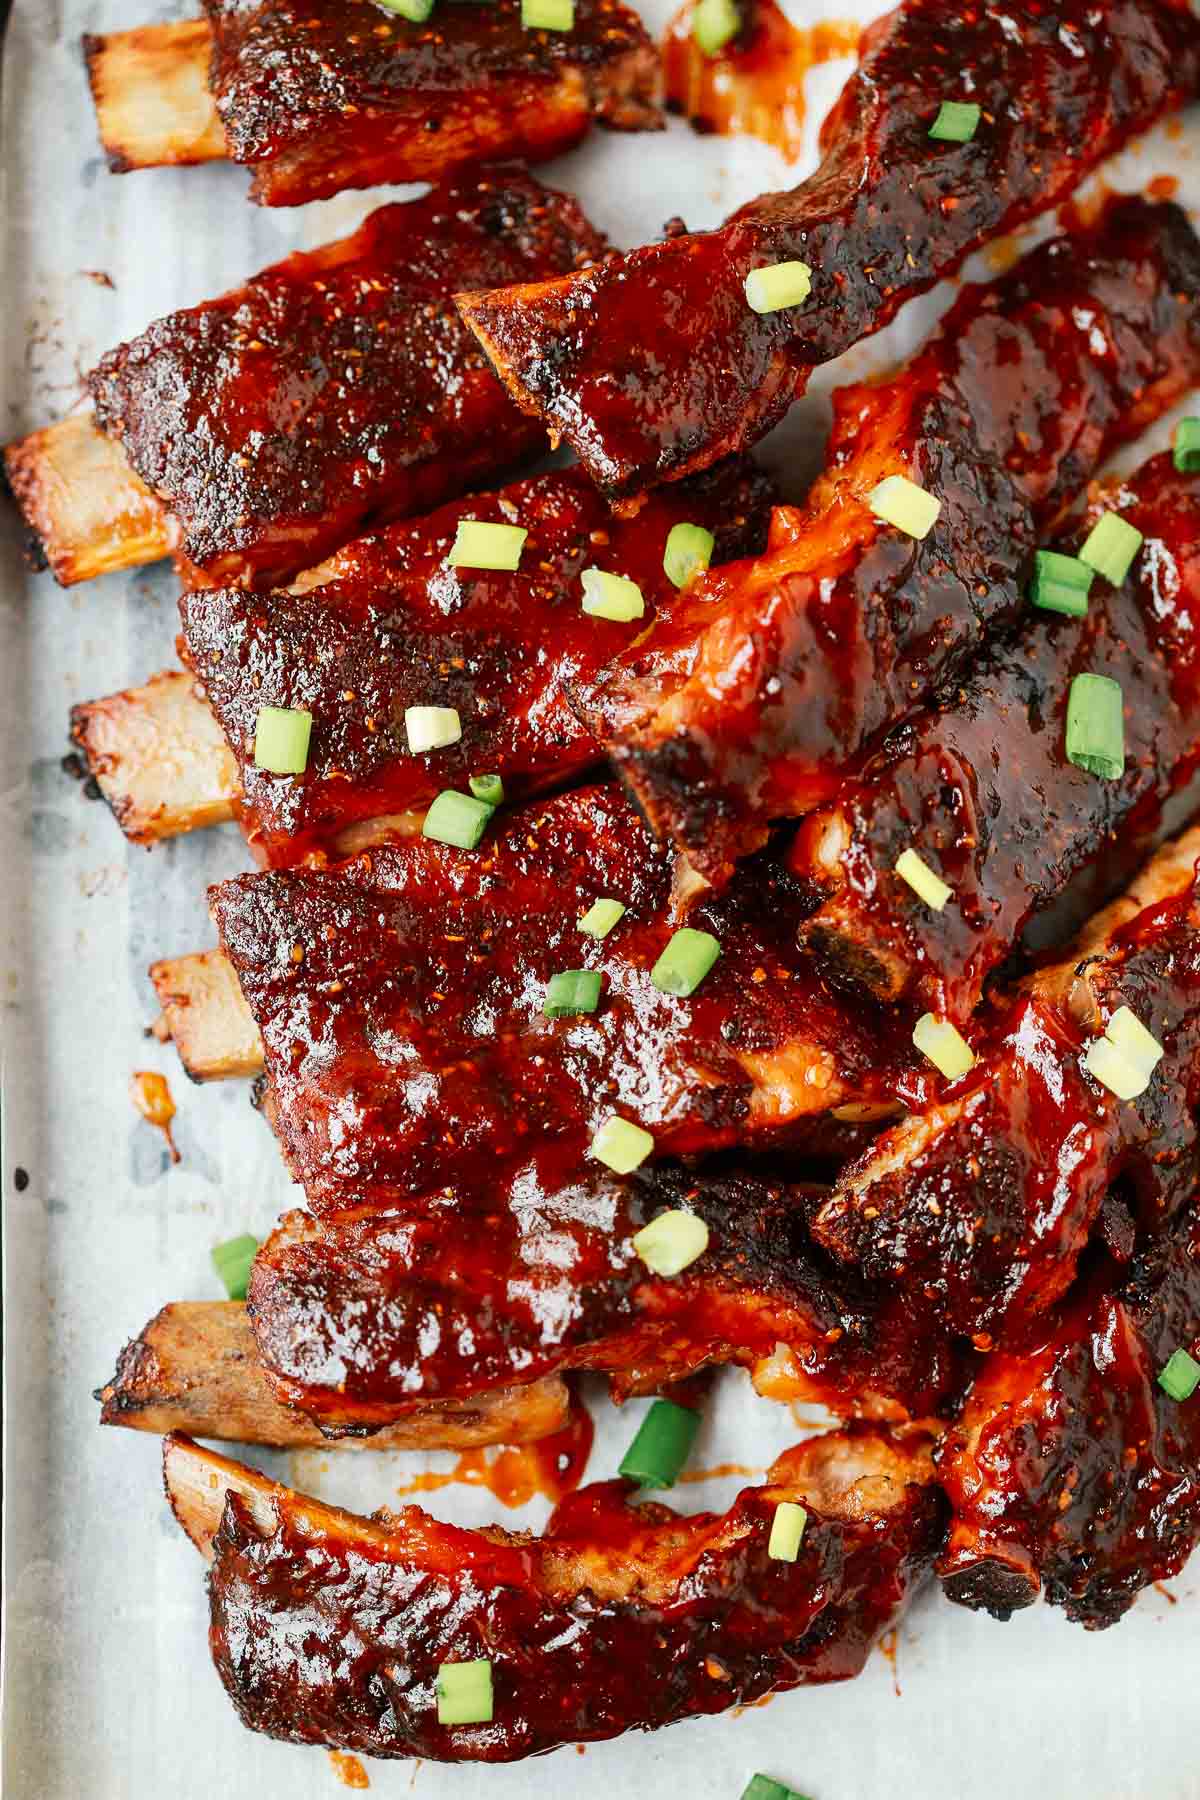 Slow cooker ribs on a sheet pan.